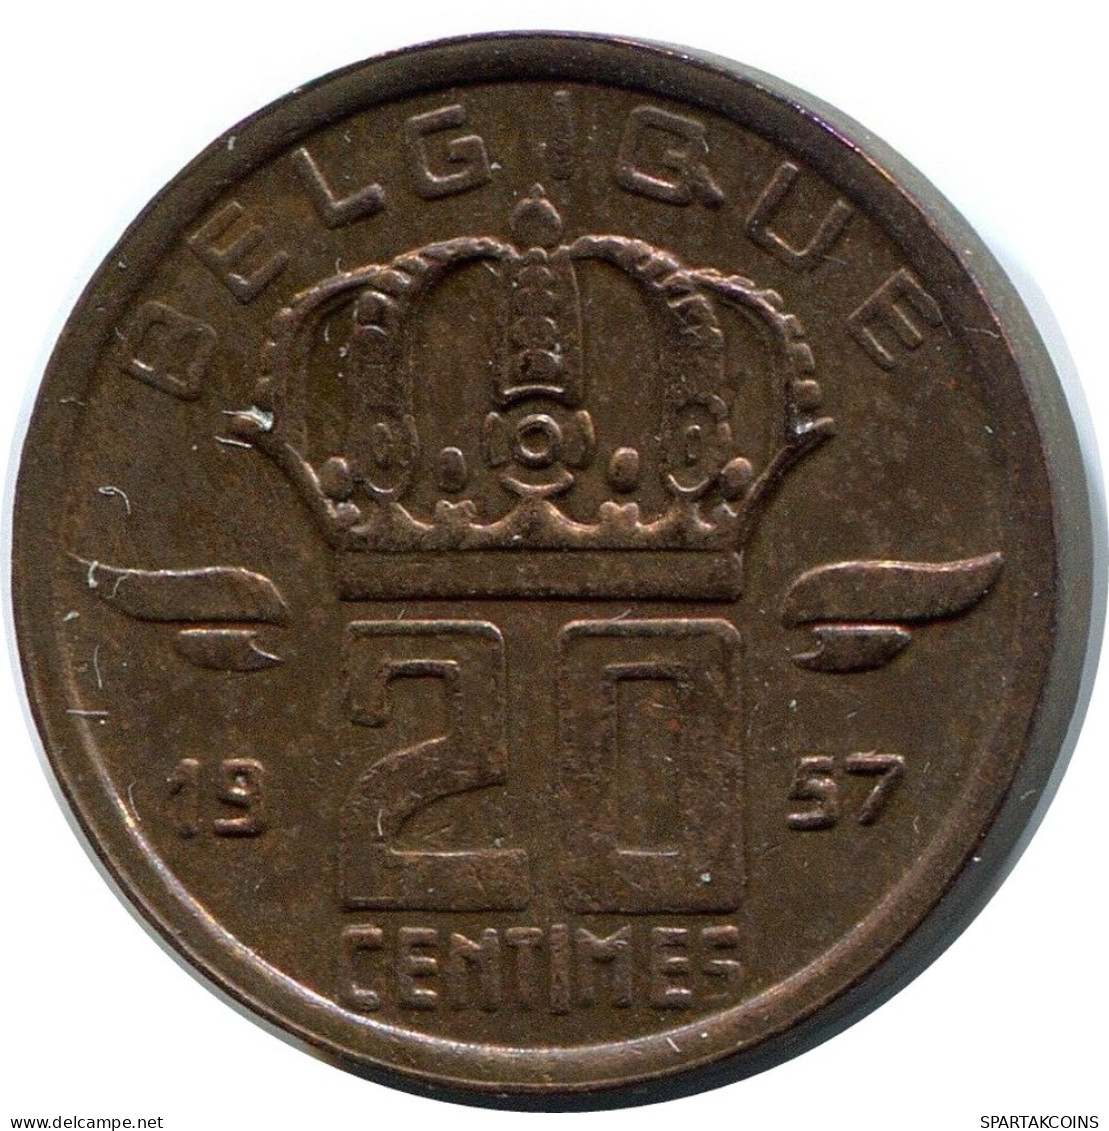 20 CENTIMES 1957 FRENCH Text BELGIUM Coin #BA399.U.A - 25 Cent